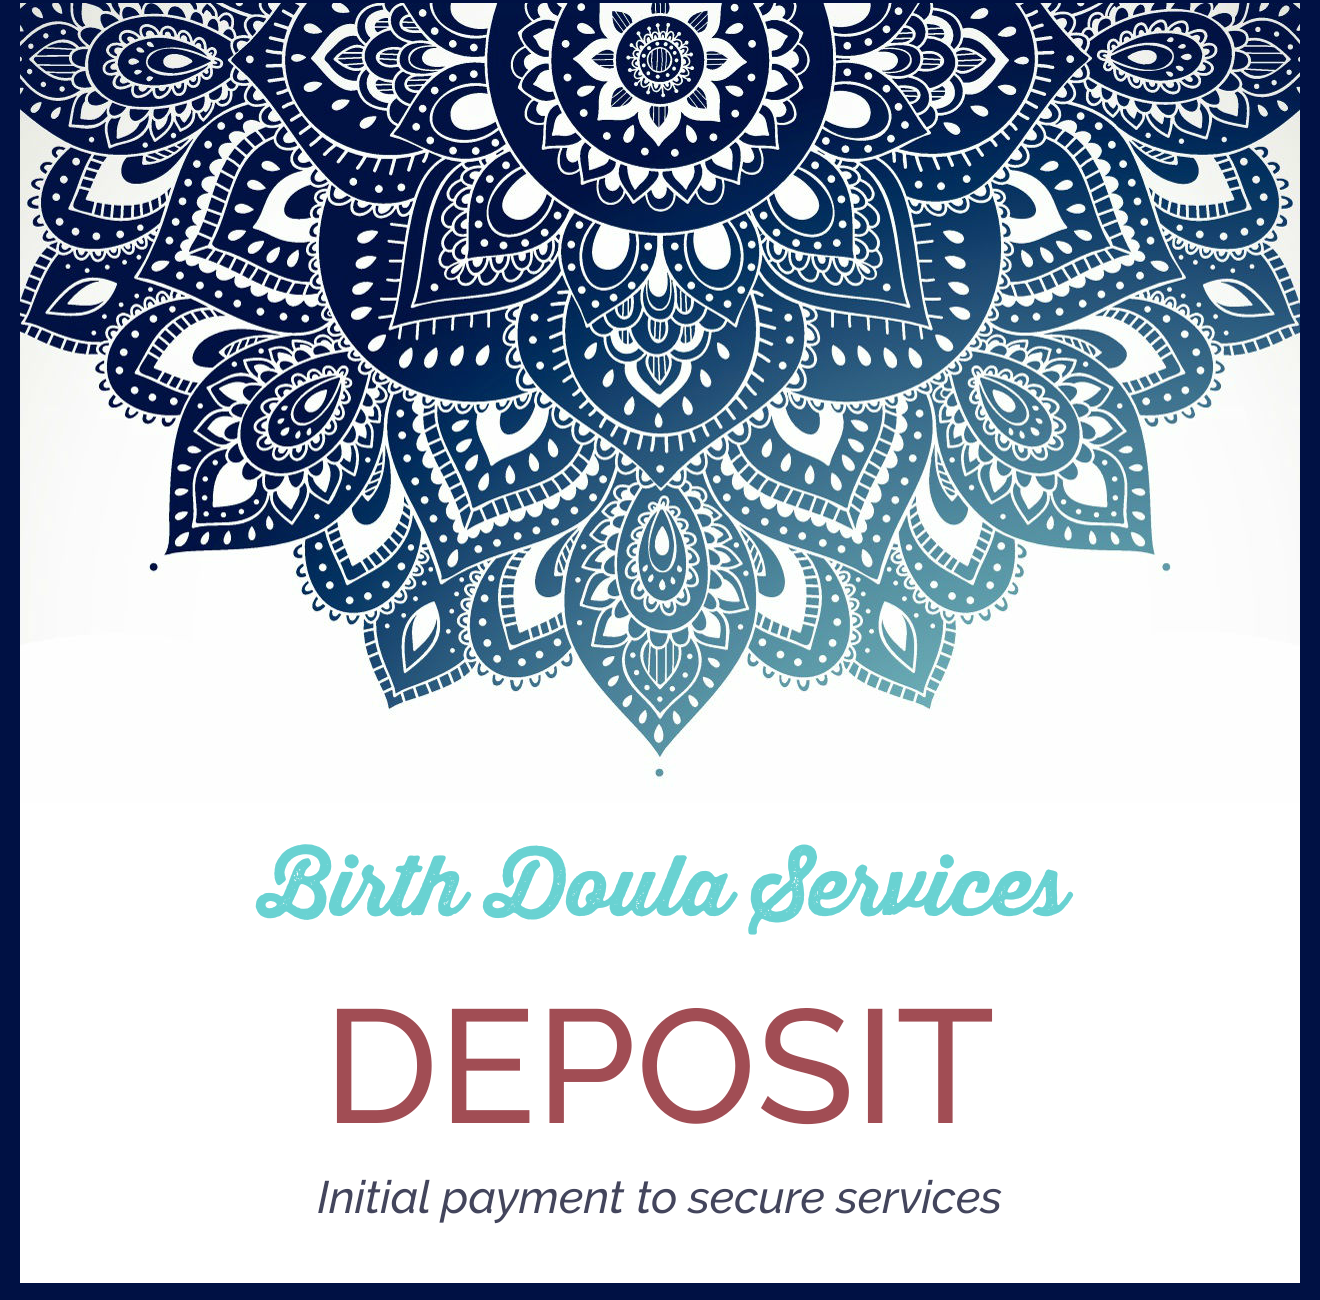 Deposit Payment for Birth Doula Services